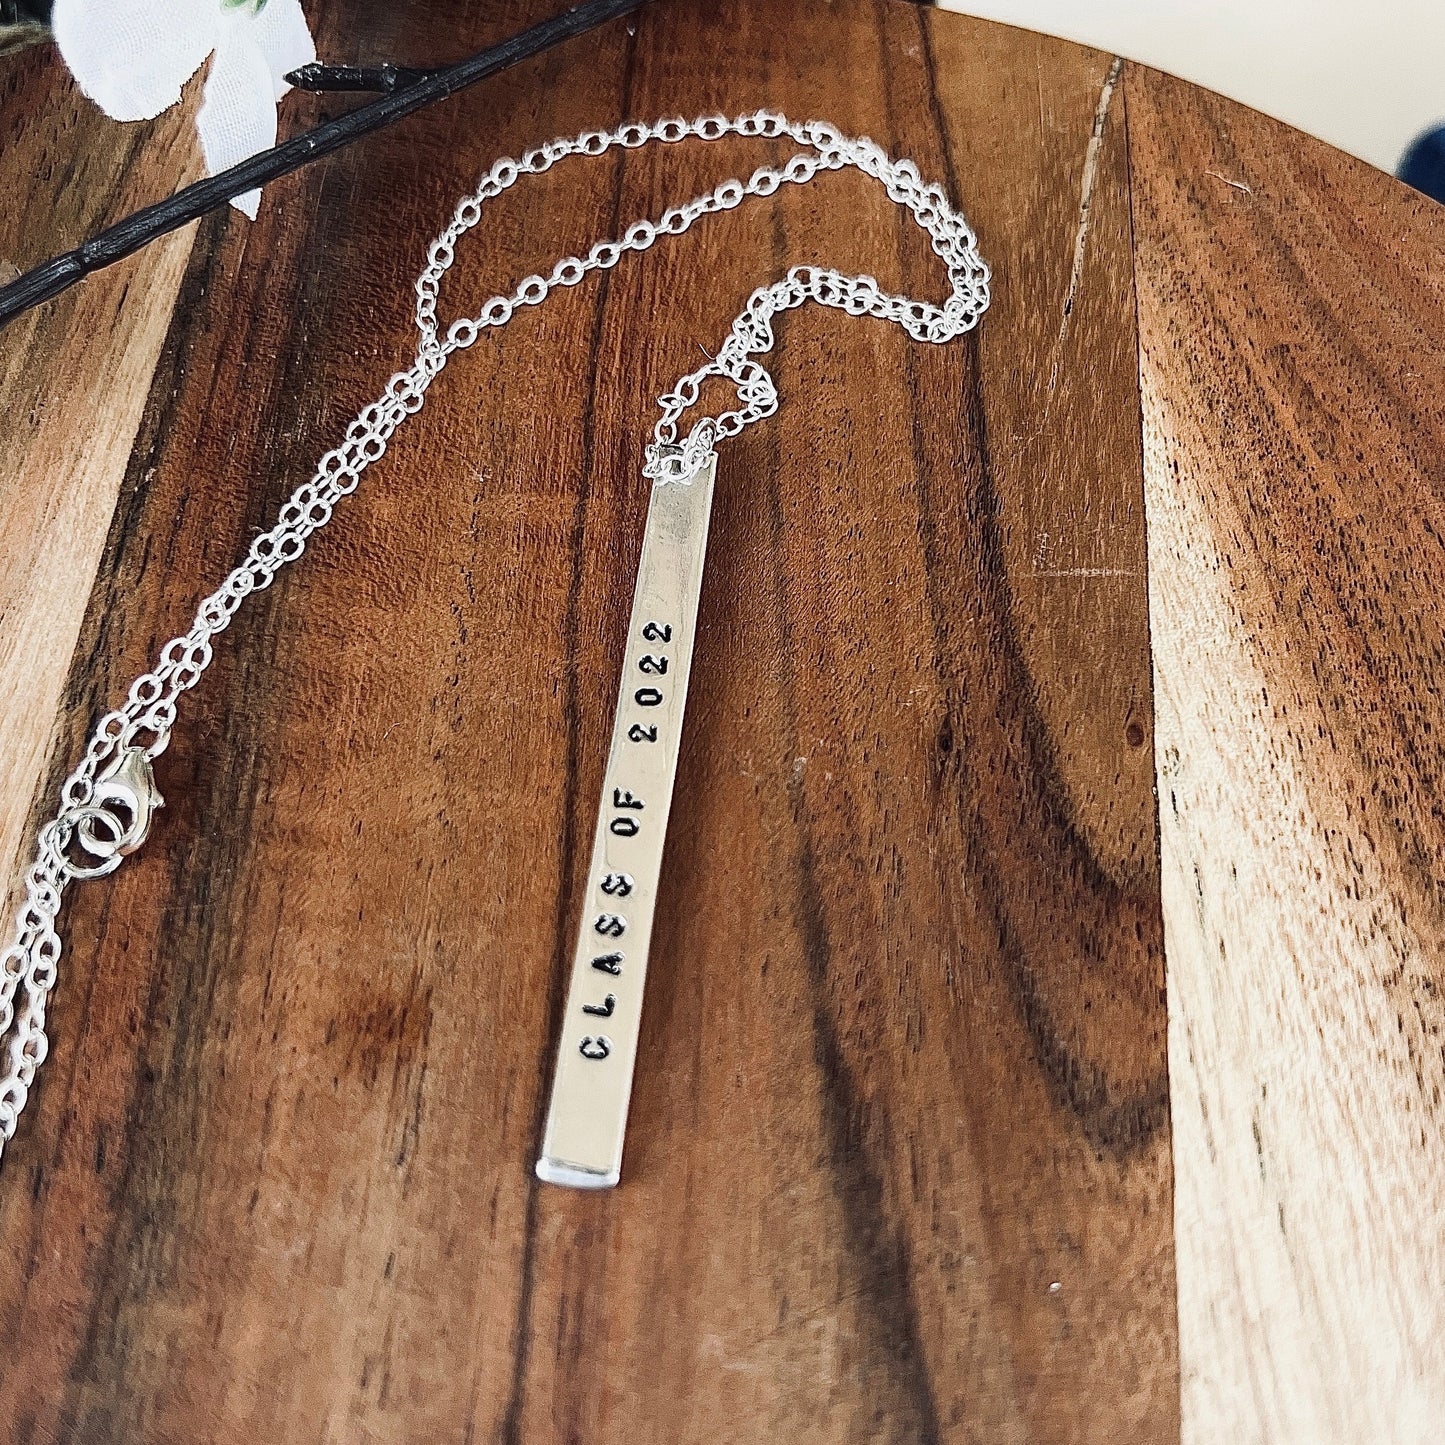 Sterling Silver Personalized Graduation Bar Necklace